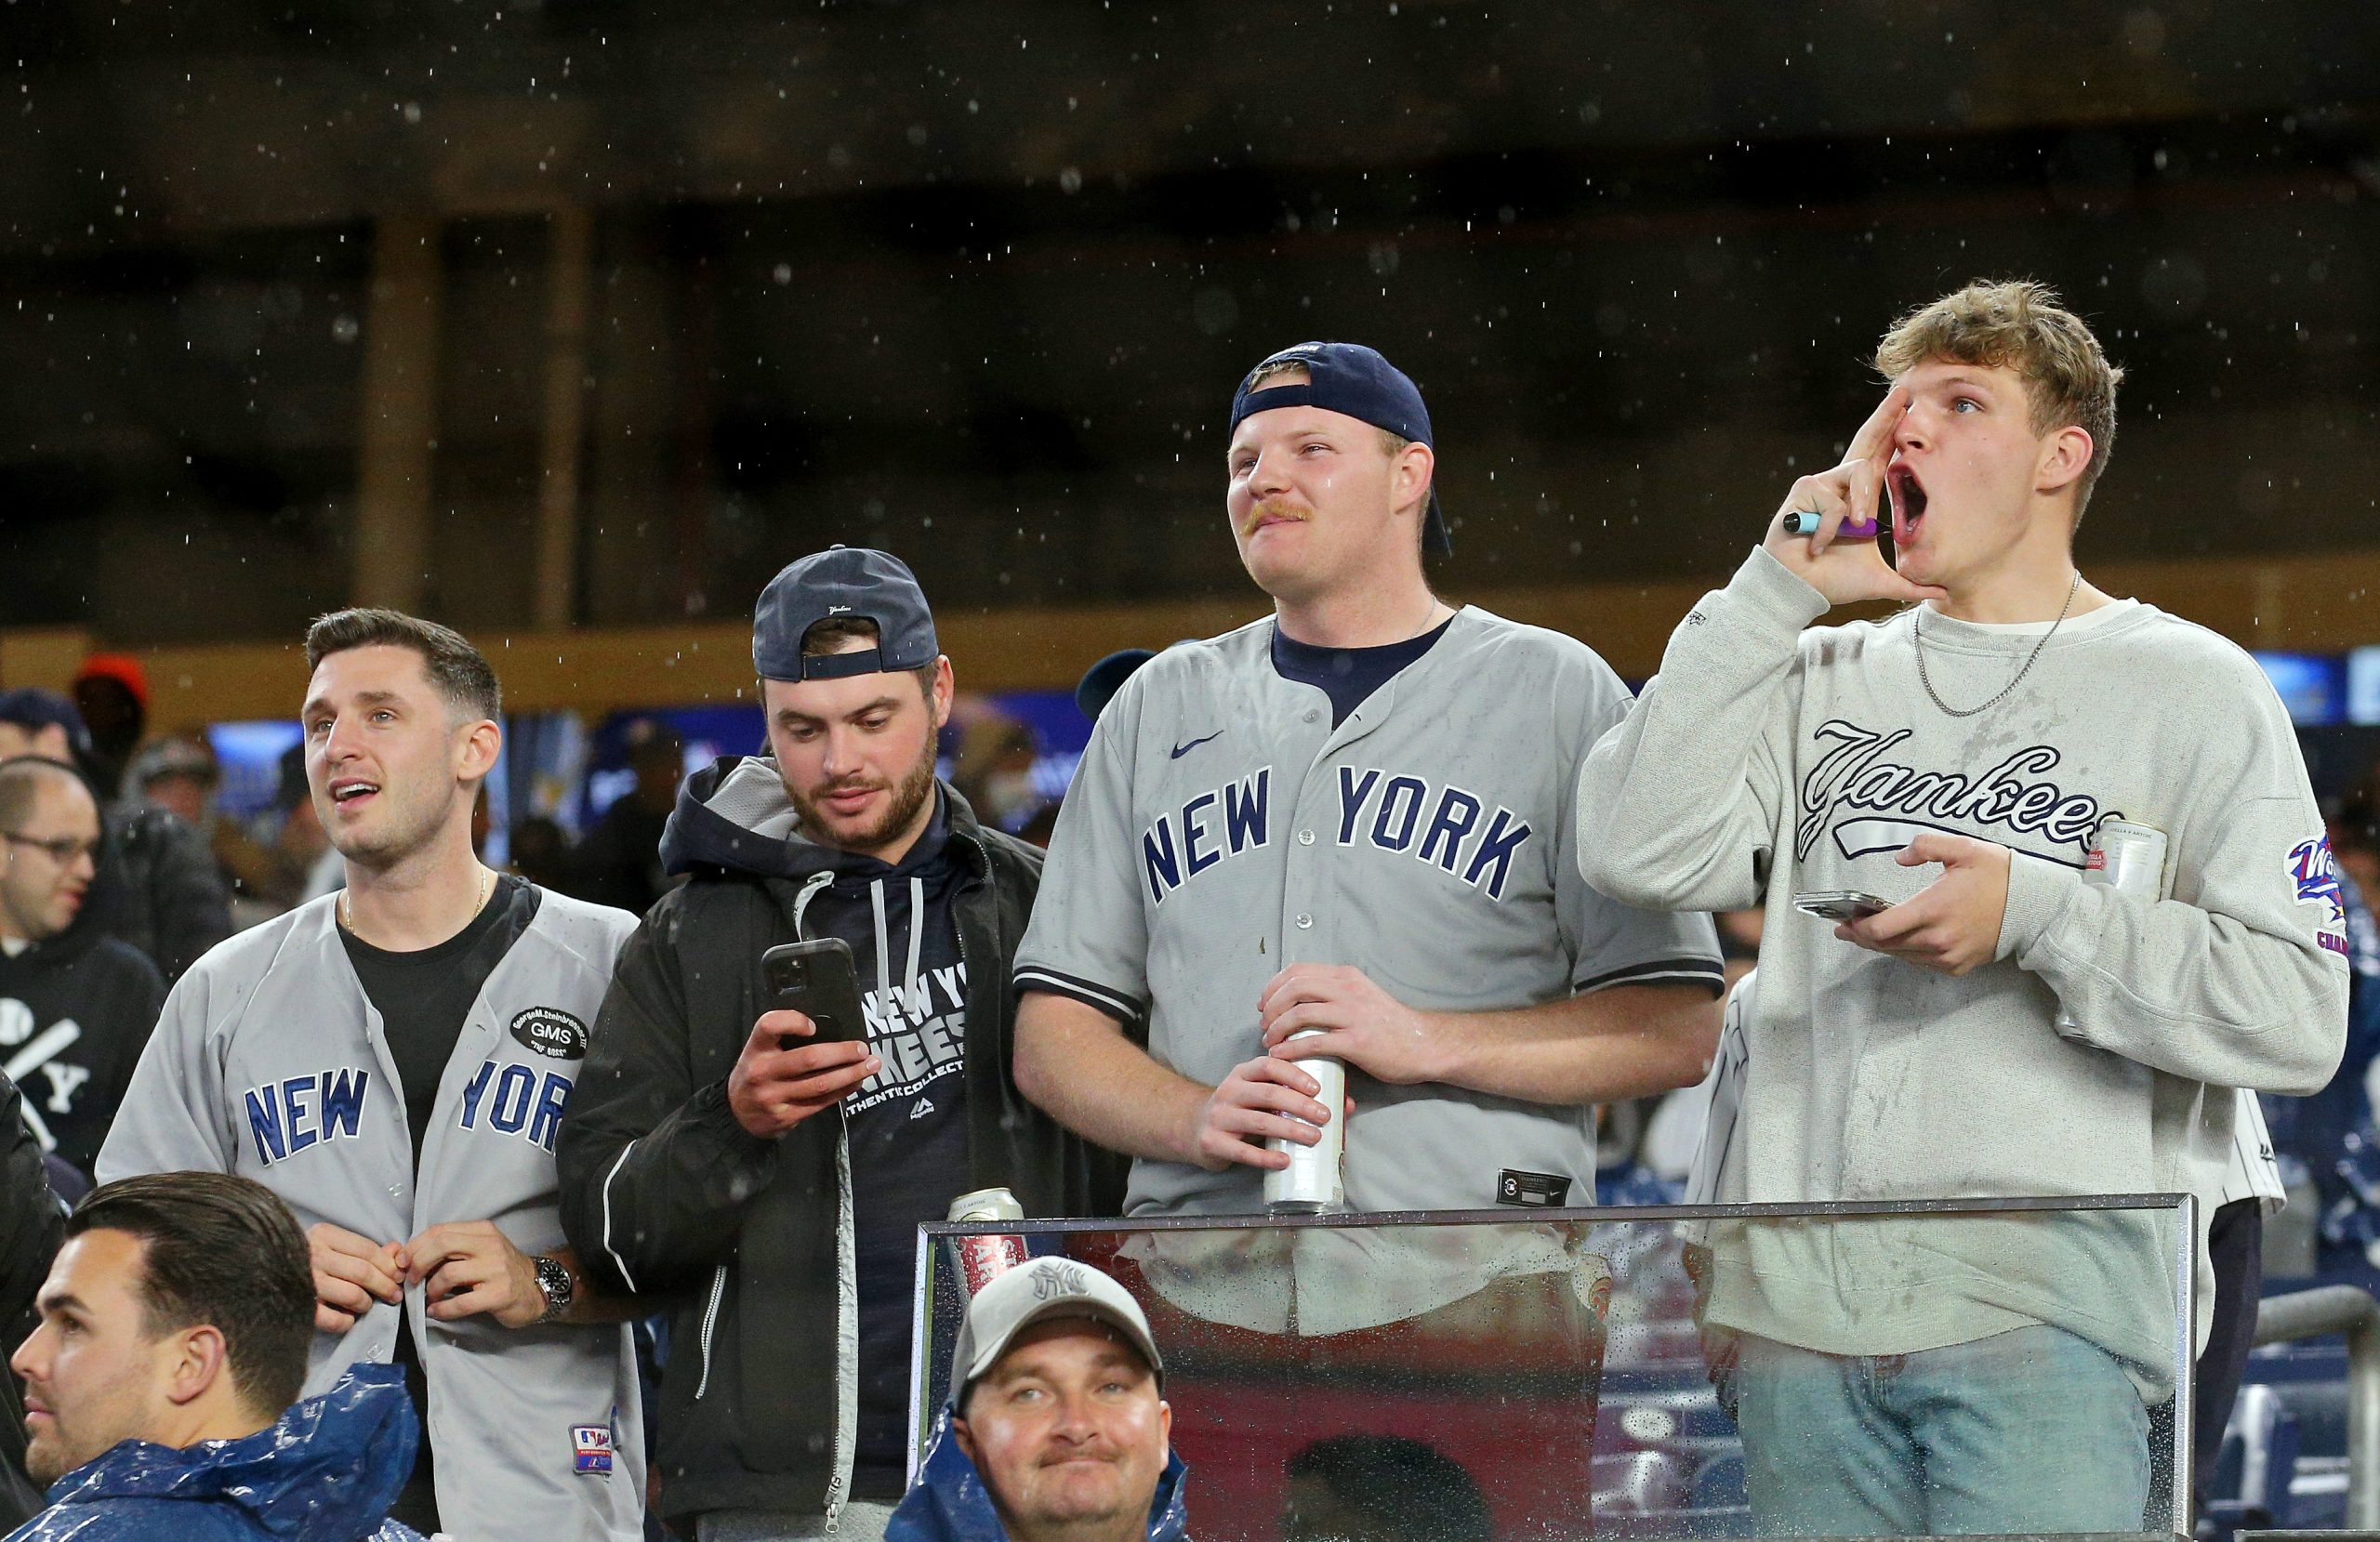 Fans waited for hours until MLB officially announced that Monday's Guardians vs. Yankees game was a rainout.